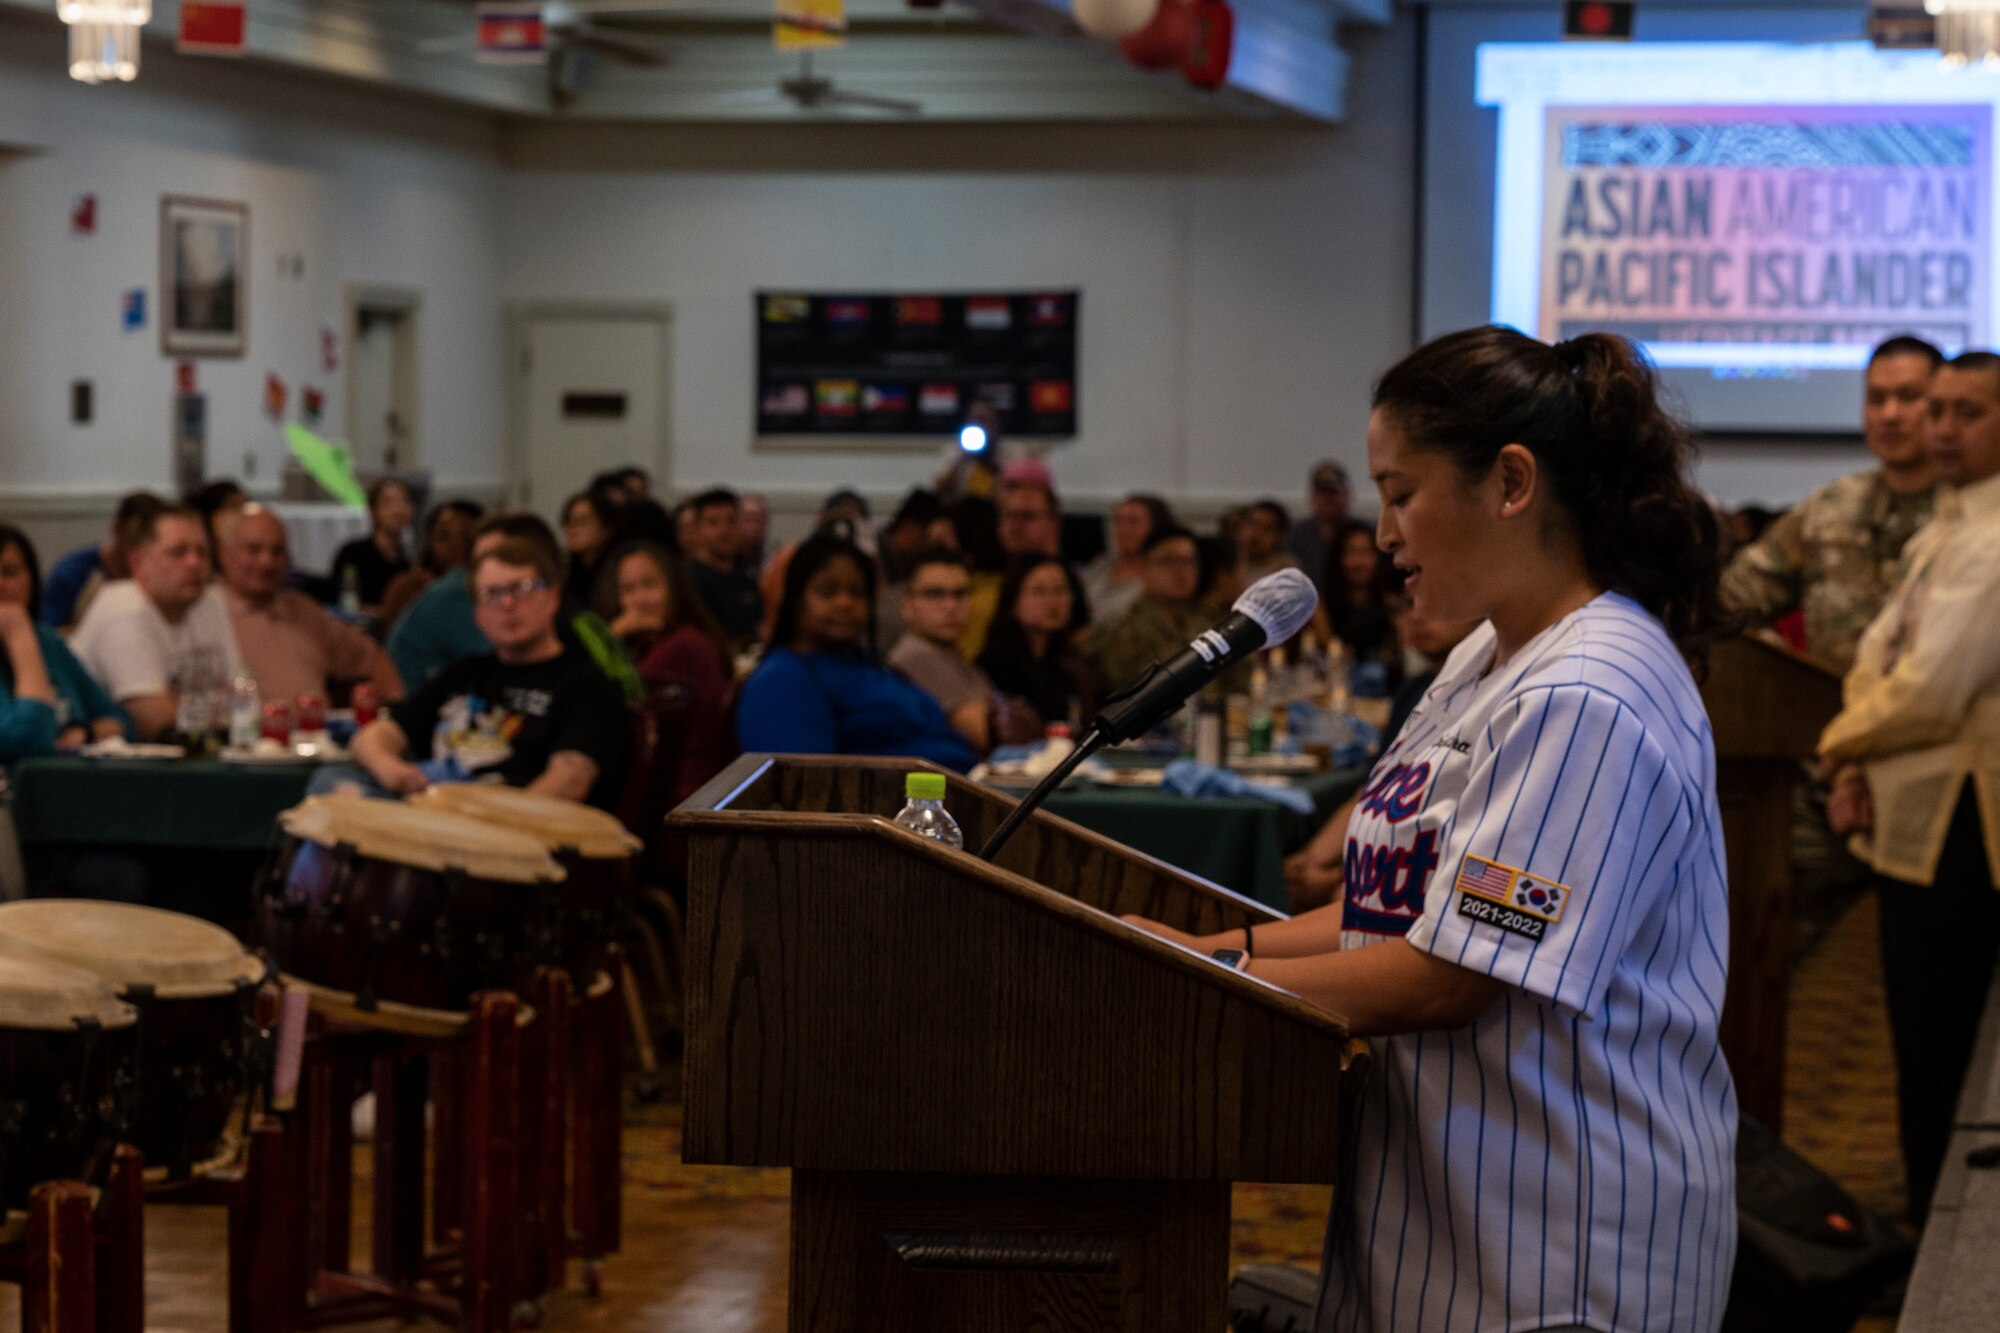 A female Airman delivers a speech about Asian American and Pacific Islander Heritage.